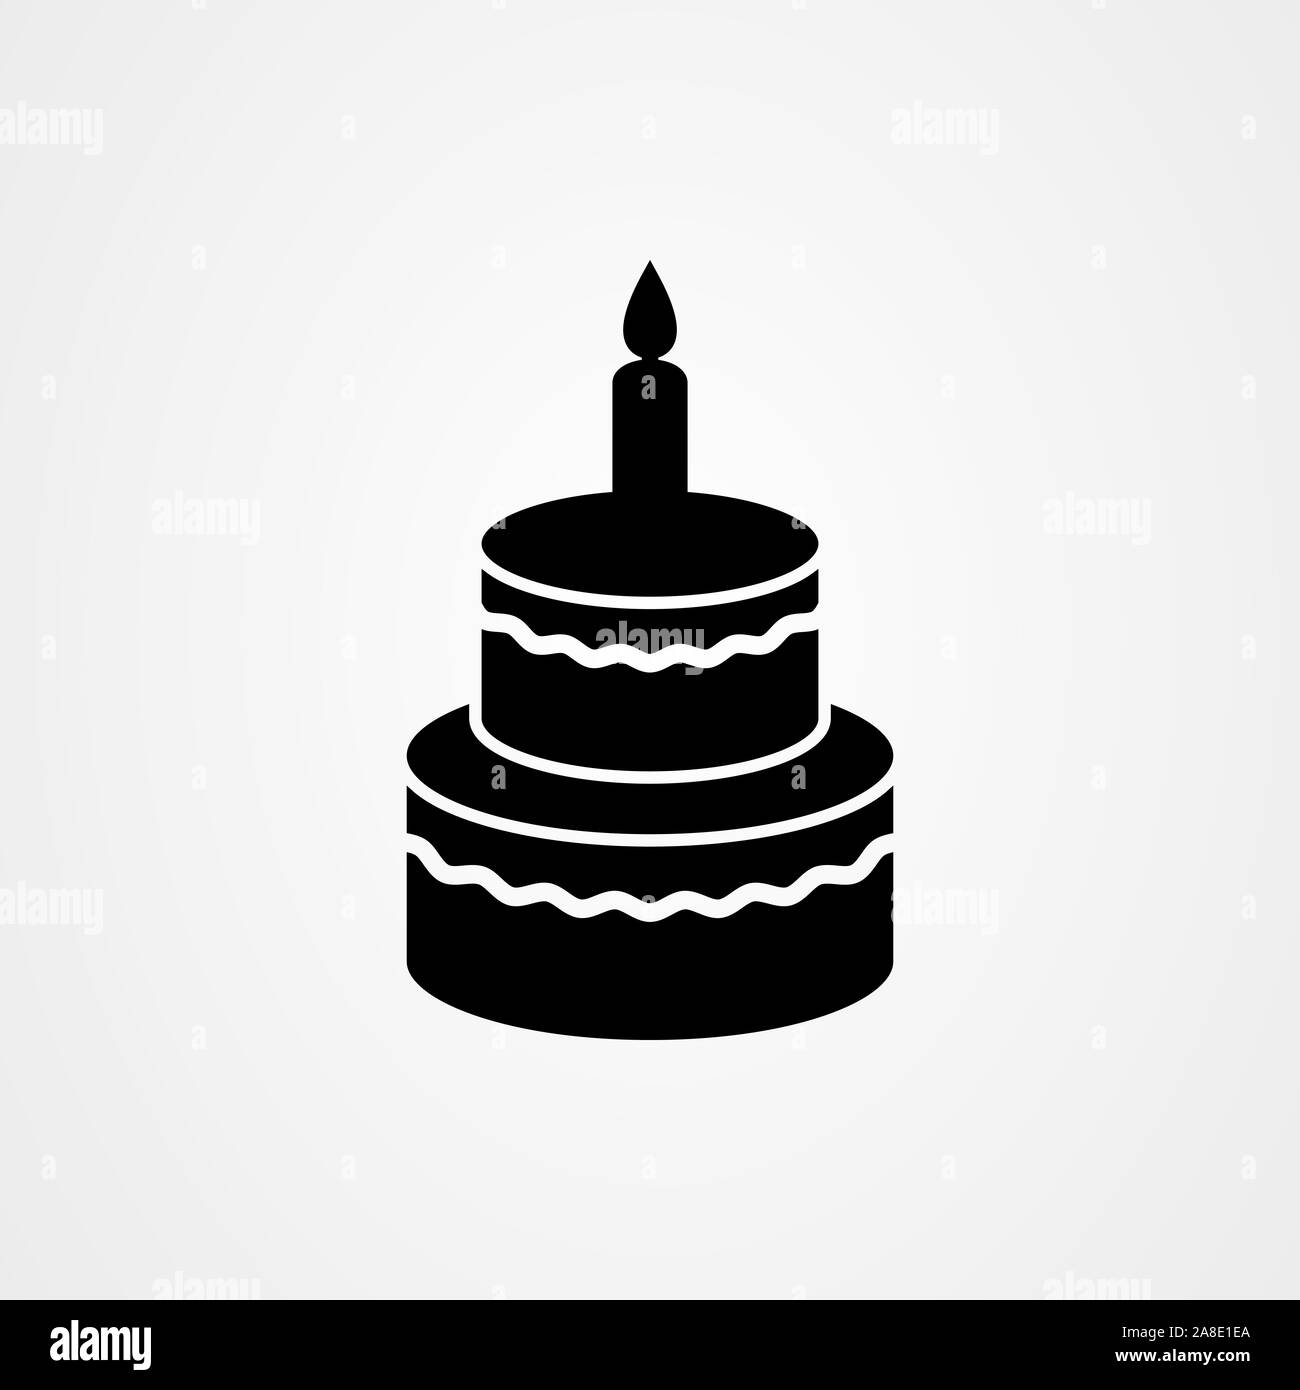 Download Free Pictures On Birthday Cake Logo PSD Mockup Template